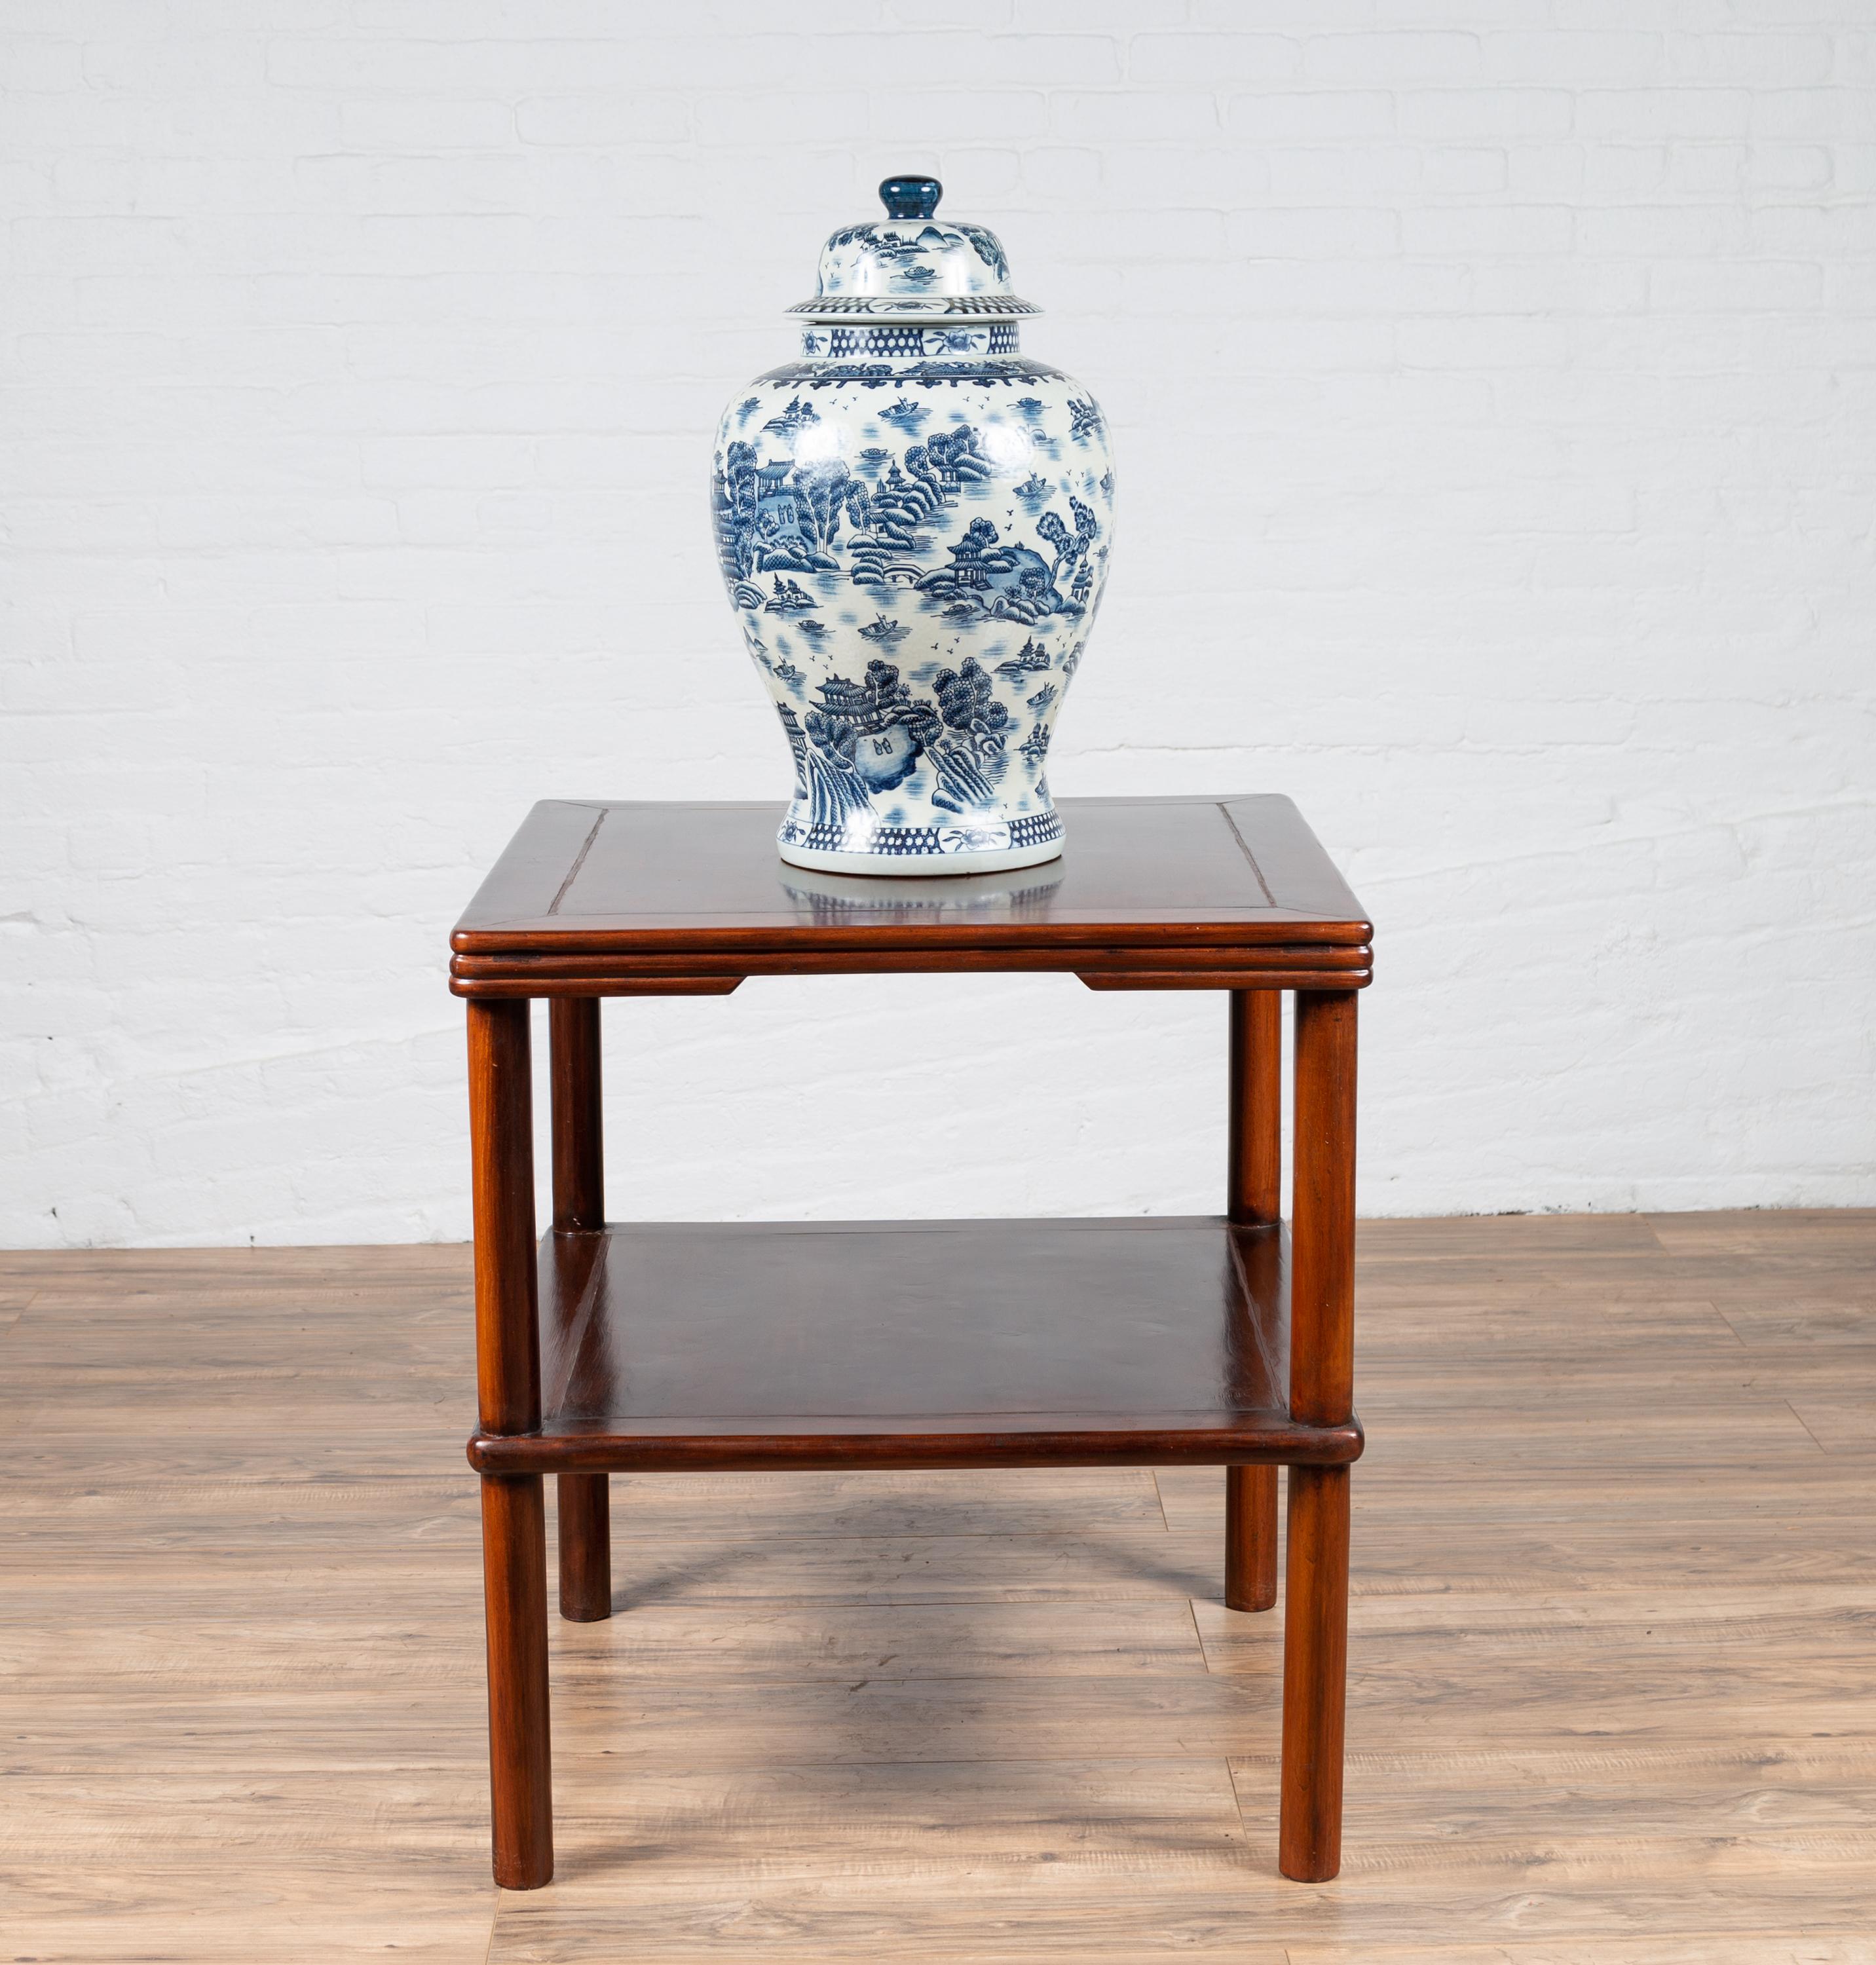 Chinese Vintage Midcentury Square-Shaped Side Table with Lower Shelf In Good Condition For Sale In Yonkers, NY